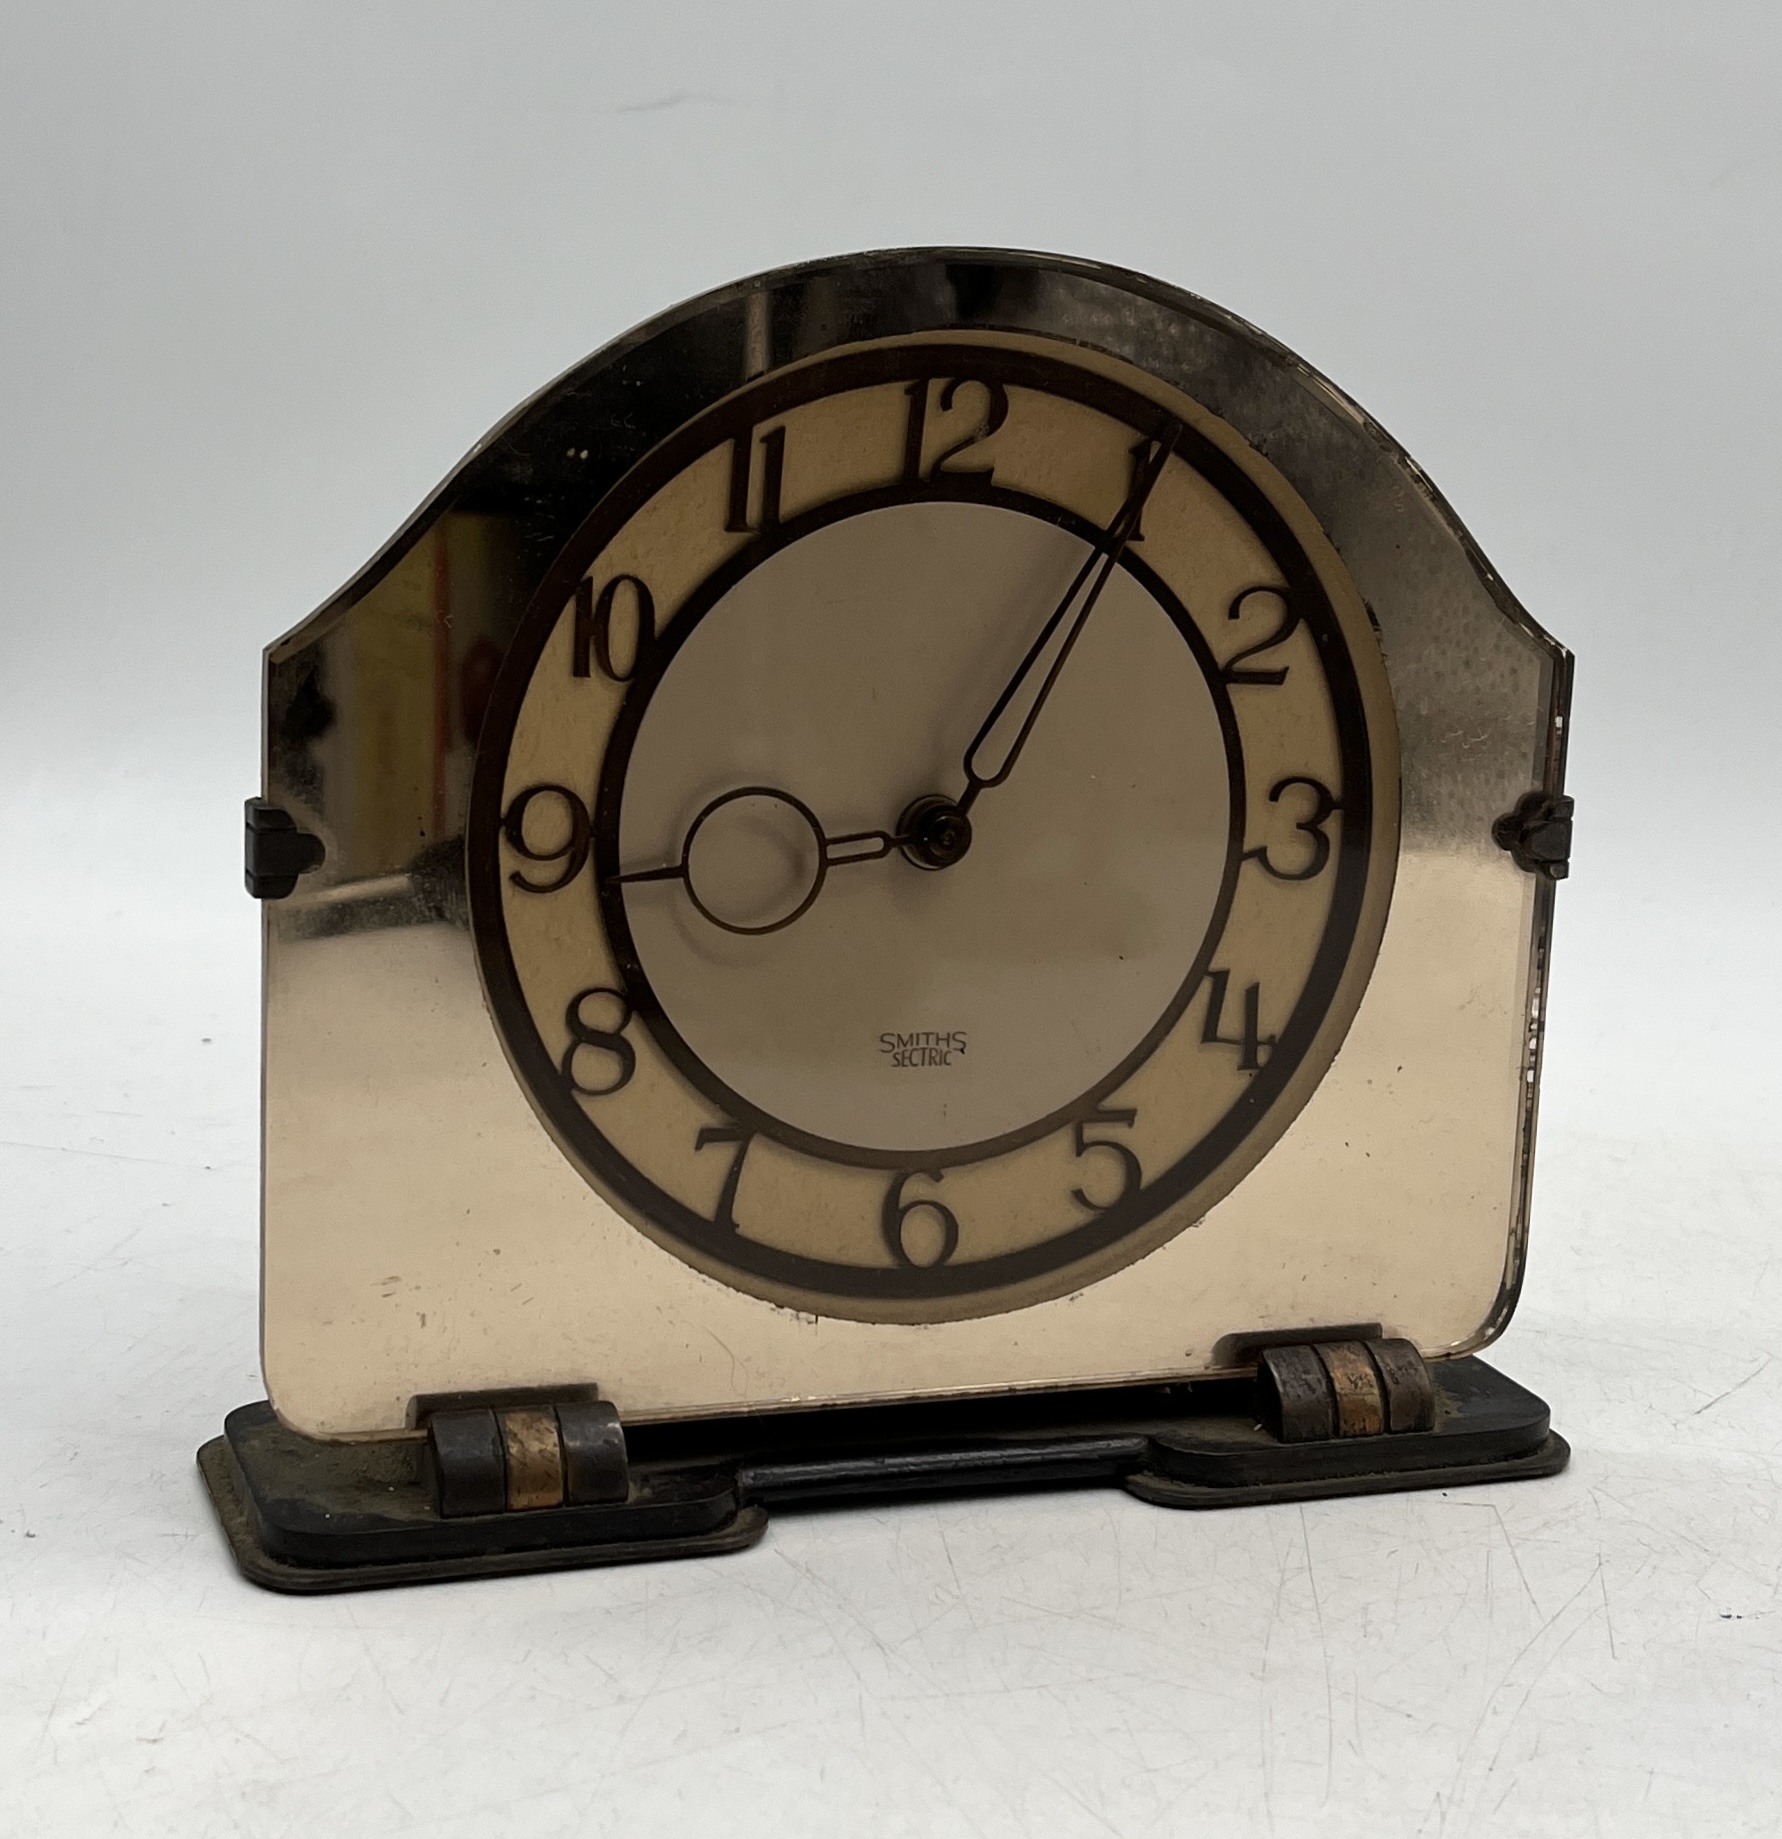 An Art Deco Smiths "Sectric" electric clock with mirrored front